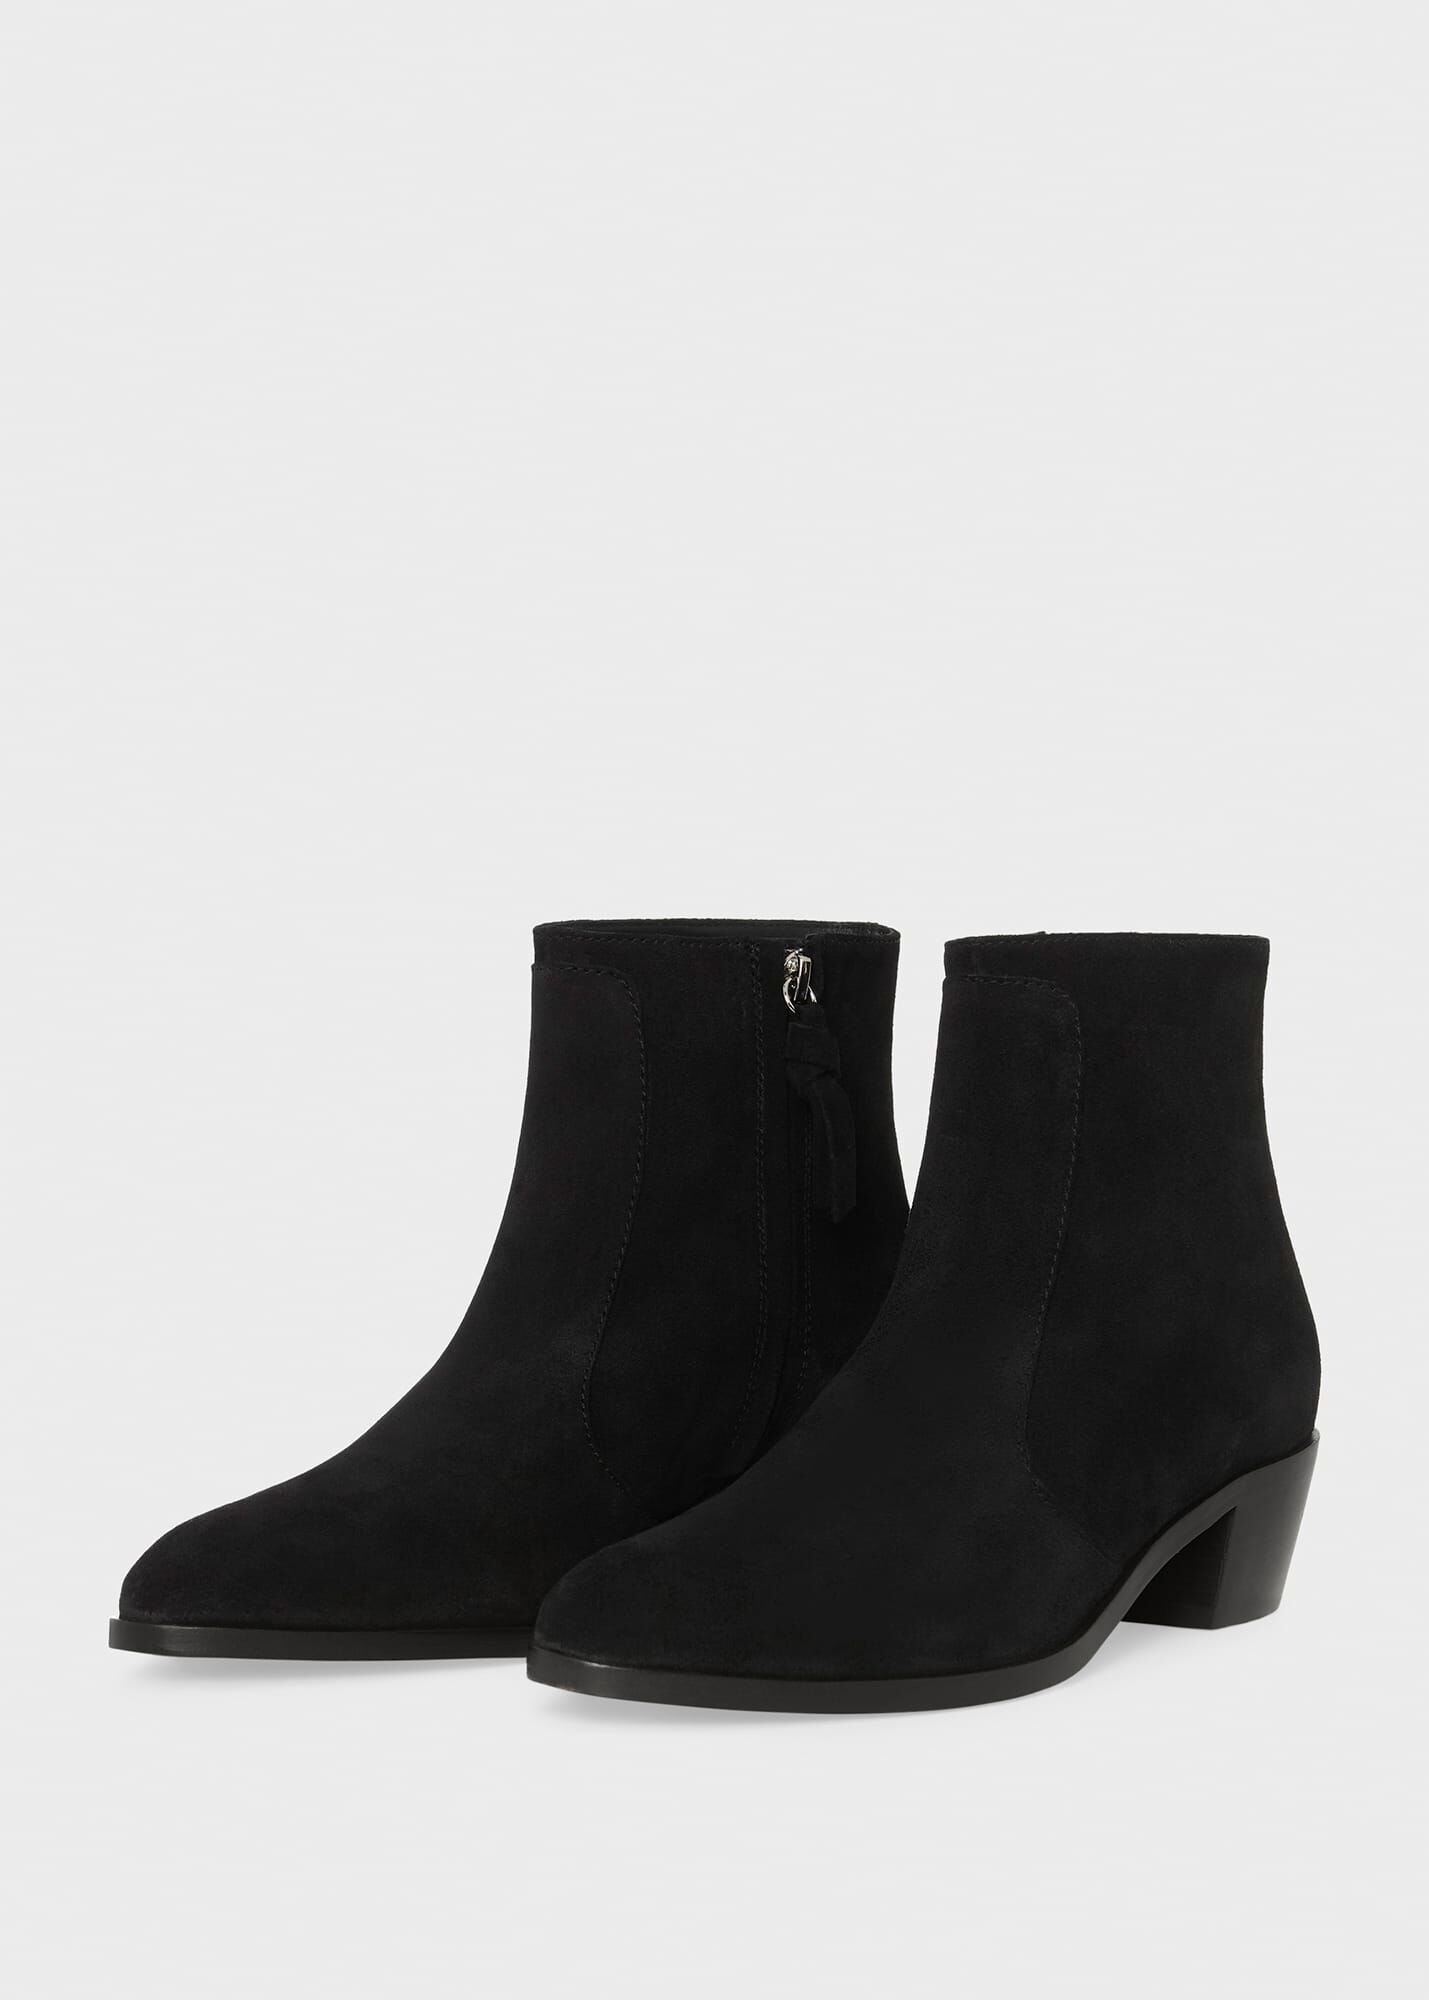 Shona Ankle Boot